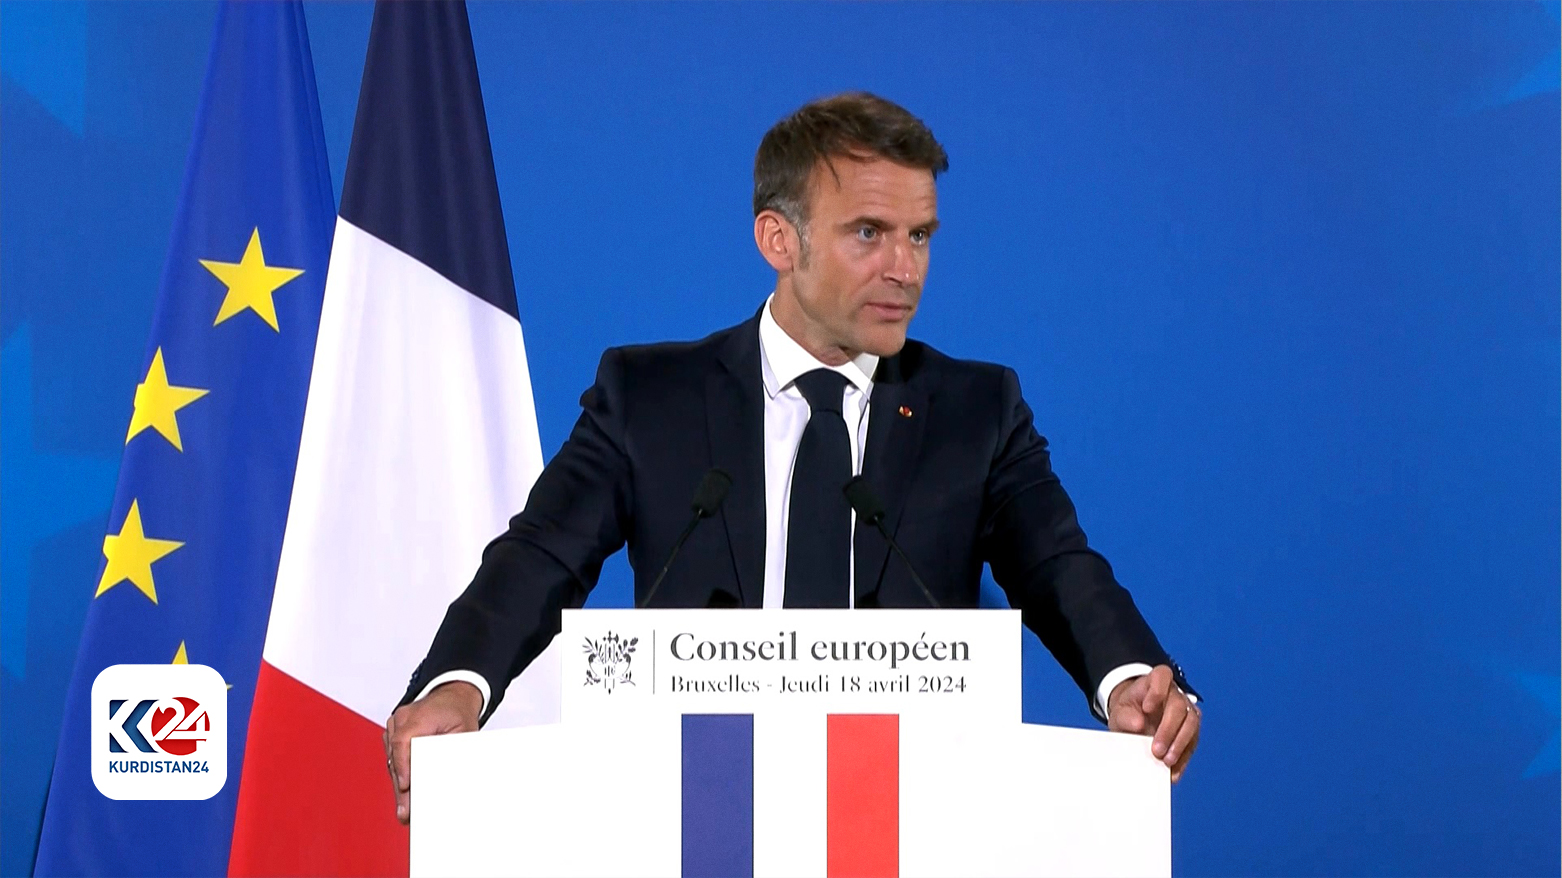 French President Emmanuel Macron was speaking to the press during a European Council meeting in Brussels, Belgium, 18 April. (Photo: Kurdistan 24)